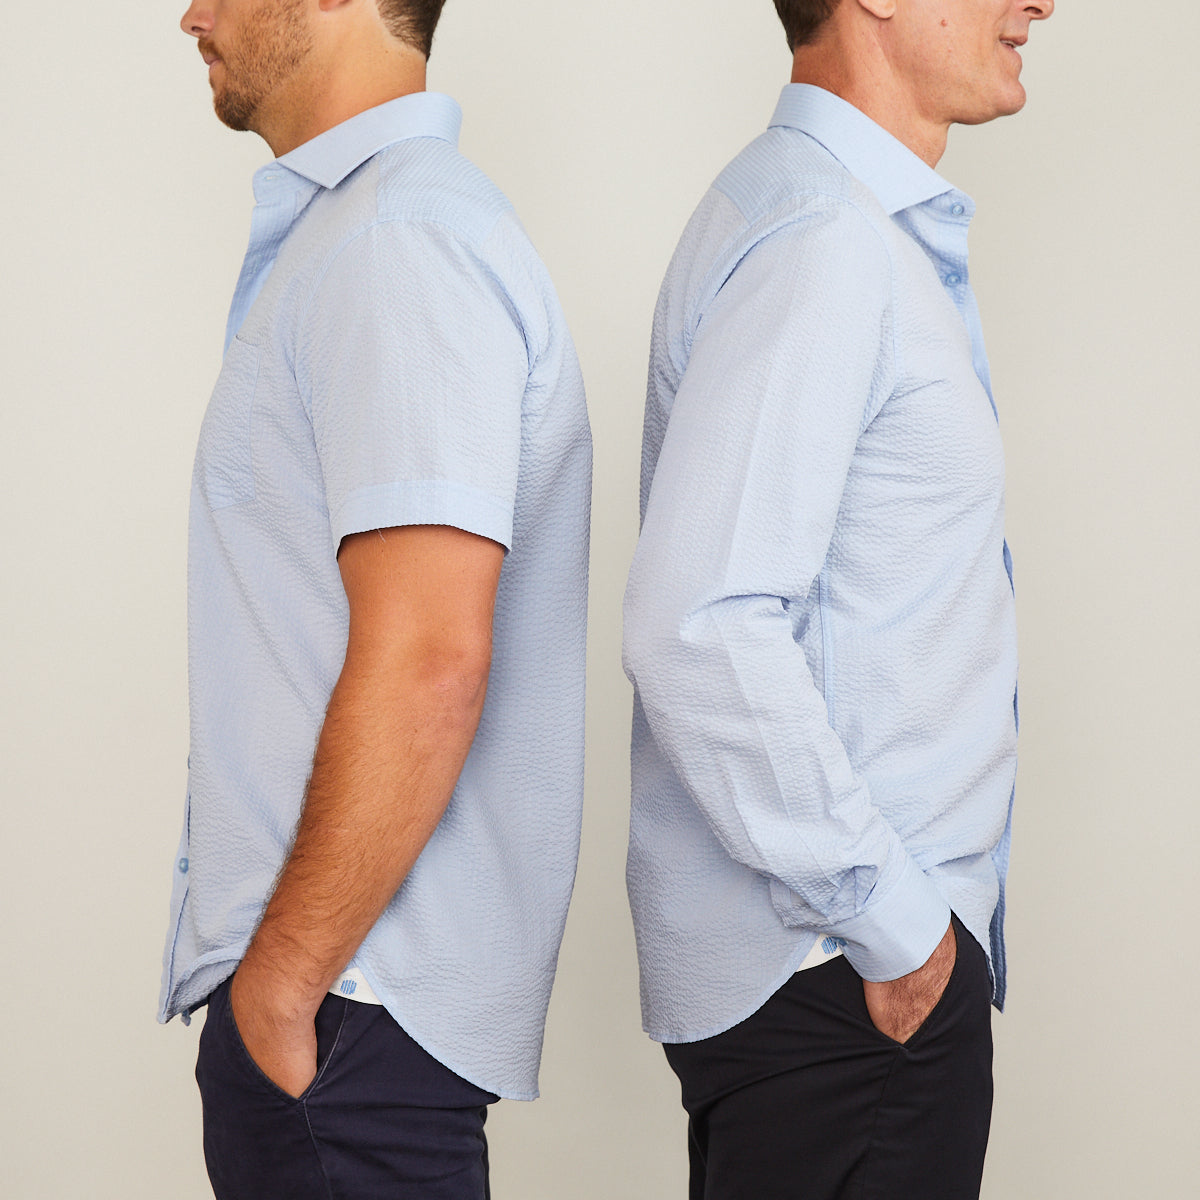 A solid look for a solid guy. The most beautiful light blue short sleeve shirt soon to be on your statuesque frame. Seersucker, lightweight, and supremely cool. Available in short or long sleeve.  100% Cotton Seersucker  •  Spread Collar  •  Short Sleeve  •  Contrast Buttons  •  Chest Pocket  •  Machine Washable  •  Made in Italy